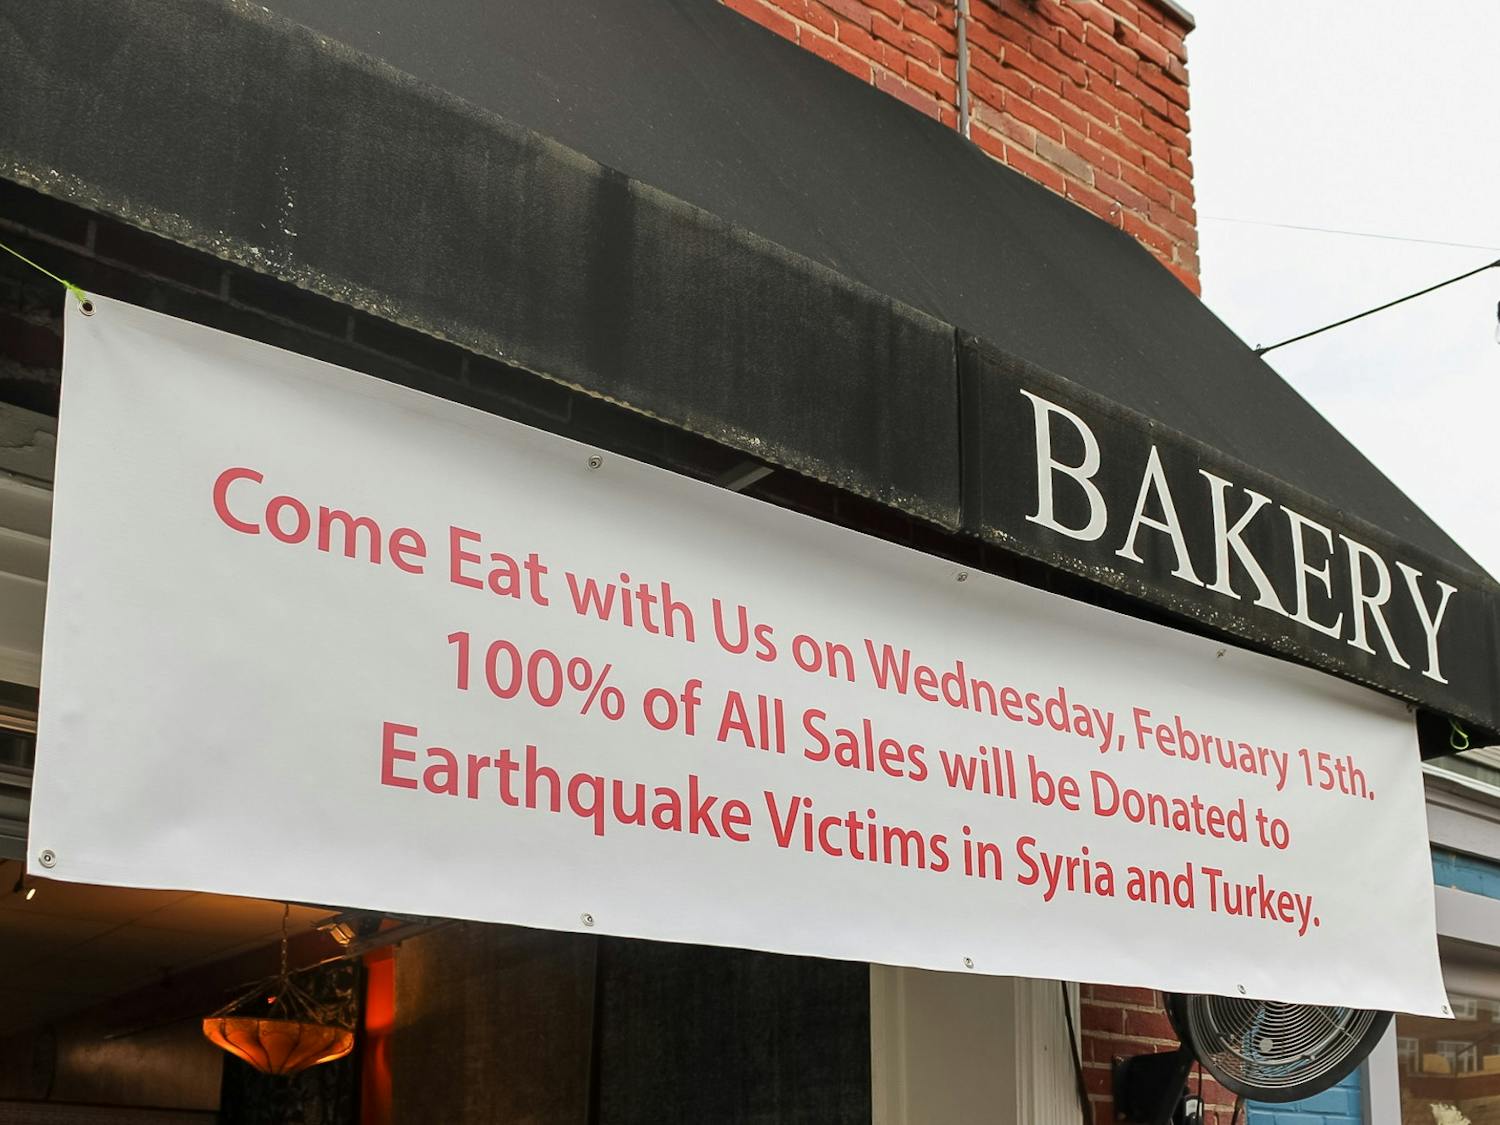 Med Deli is pictured during their fundraiser to assist the people impacted by the devastation of the earthquake in Turkey and Syria on Wednesday, Feb. 15, 2023.
Photo Courtesy of Caroline Horne.